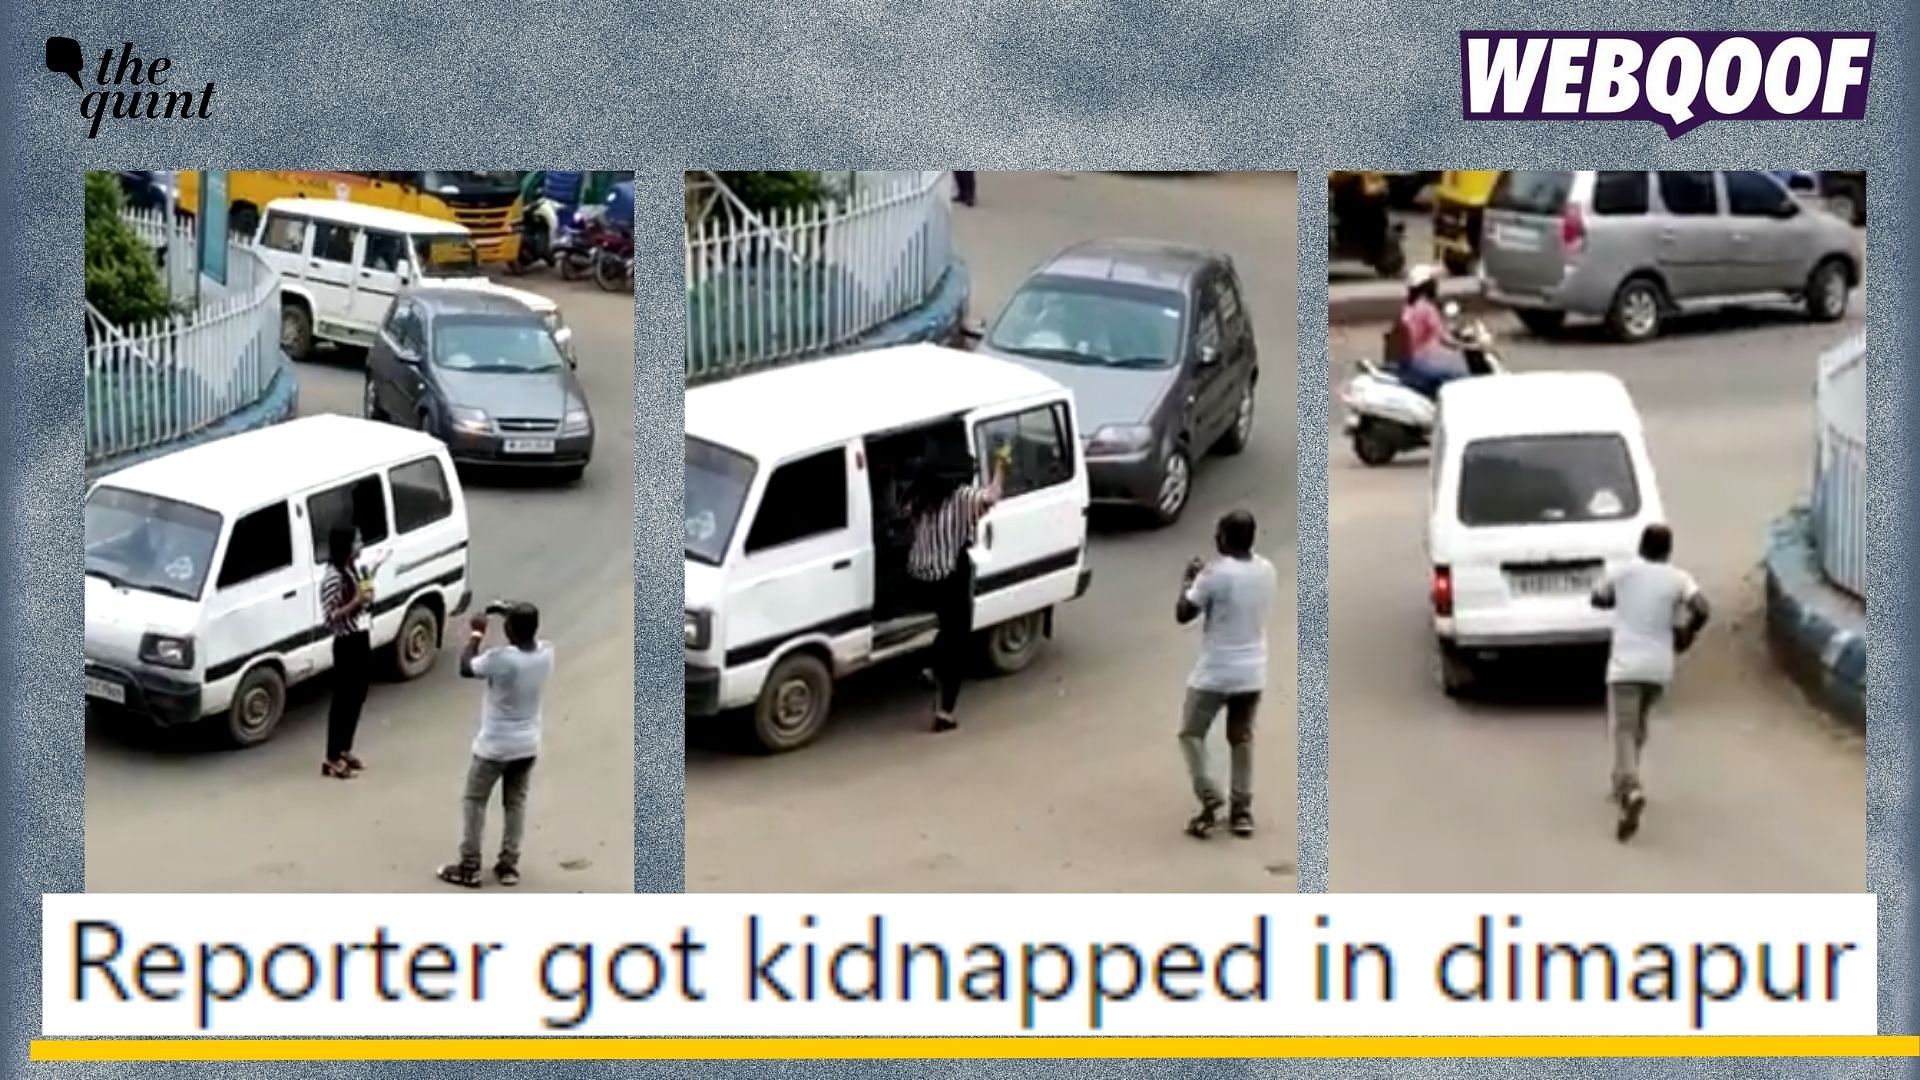 <div class="paragraphs"><p>Fact-check:&nbsp;A movie scene showing a reporter getting kidnapped in being falsely shared as a real incident of kidnapping in Dimapur, Nagaland.</p></div>